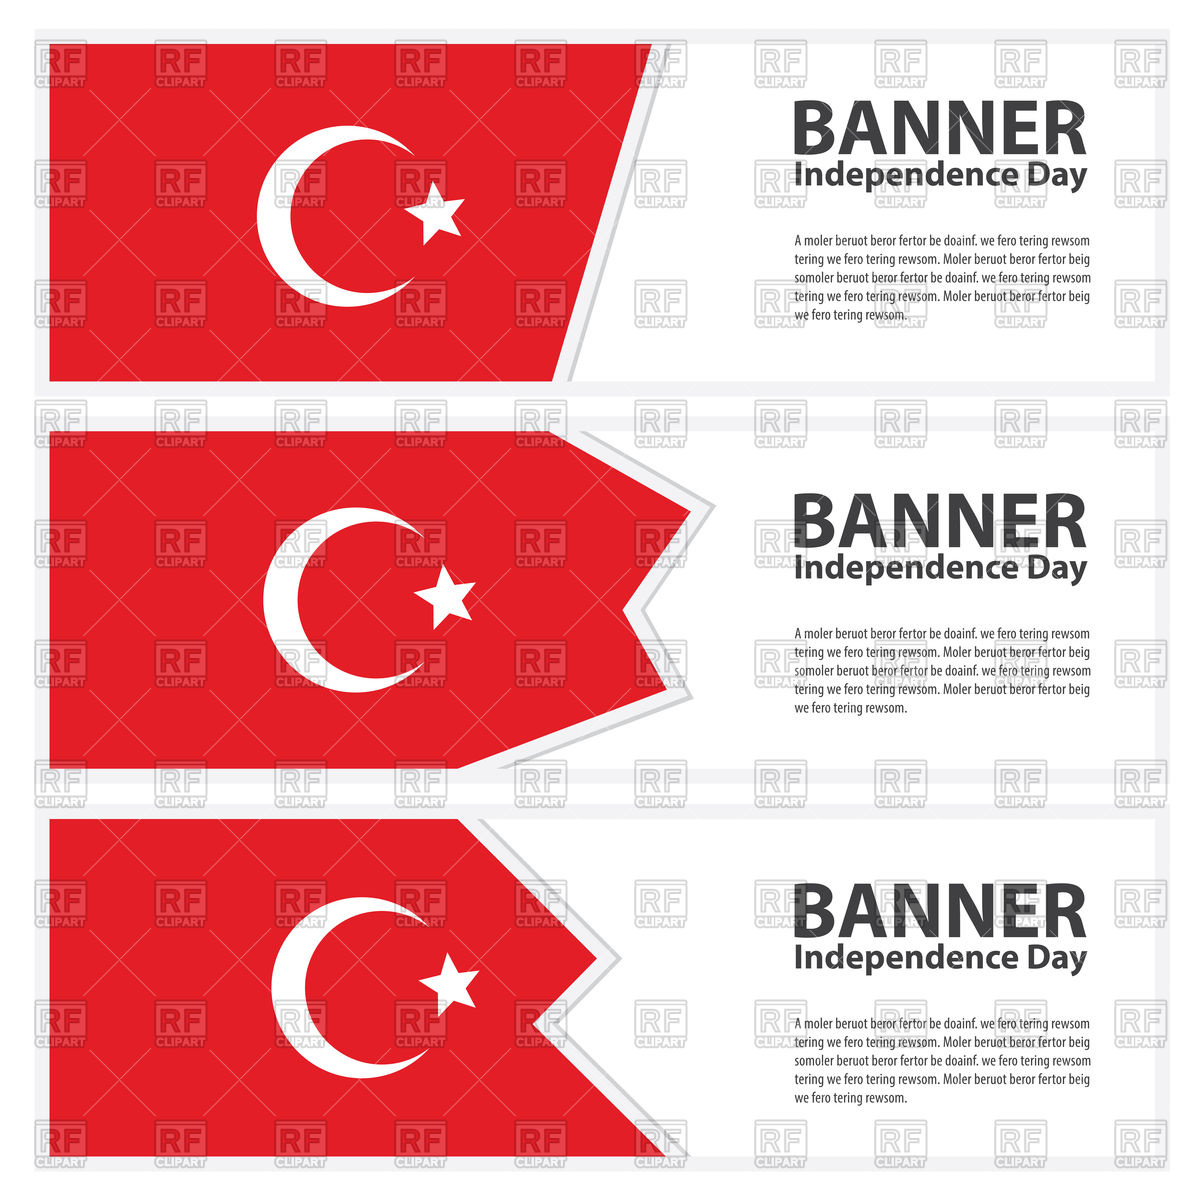 Turkey Flag Banners 89132 Download Royalty Free Vector Clipart  Eps